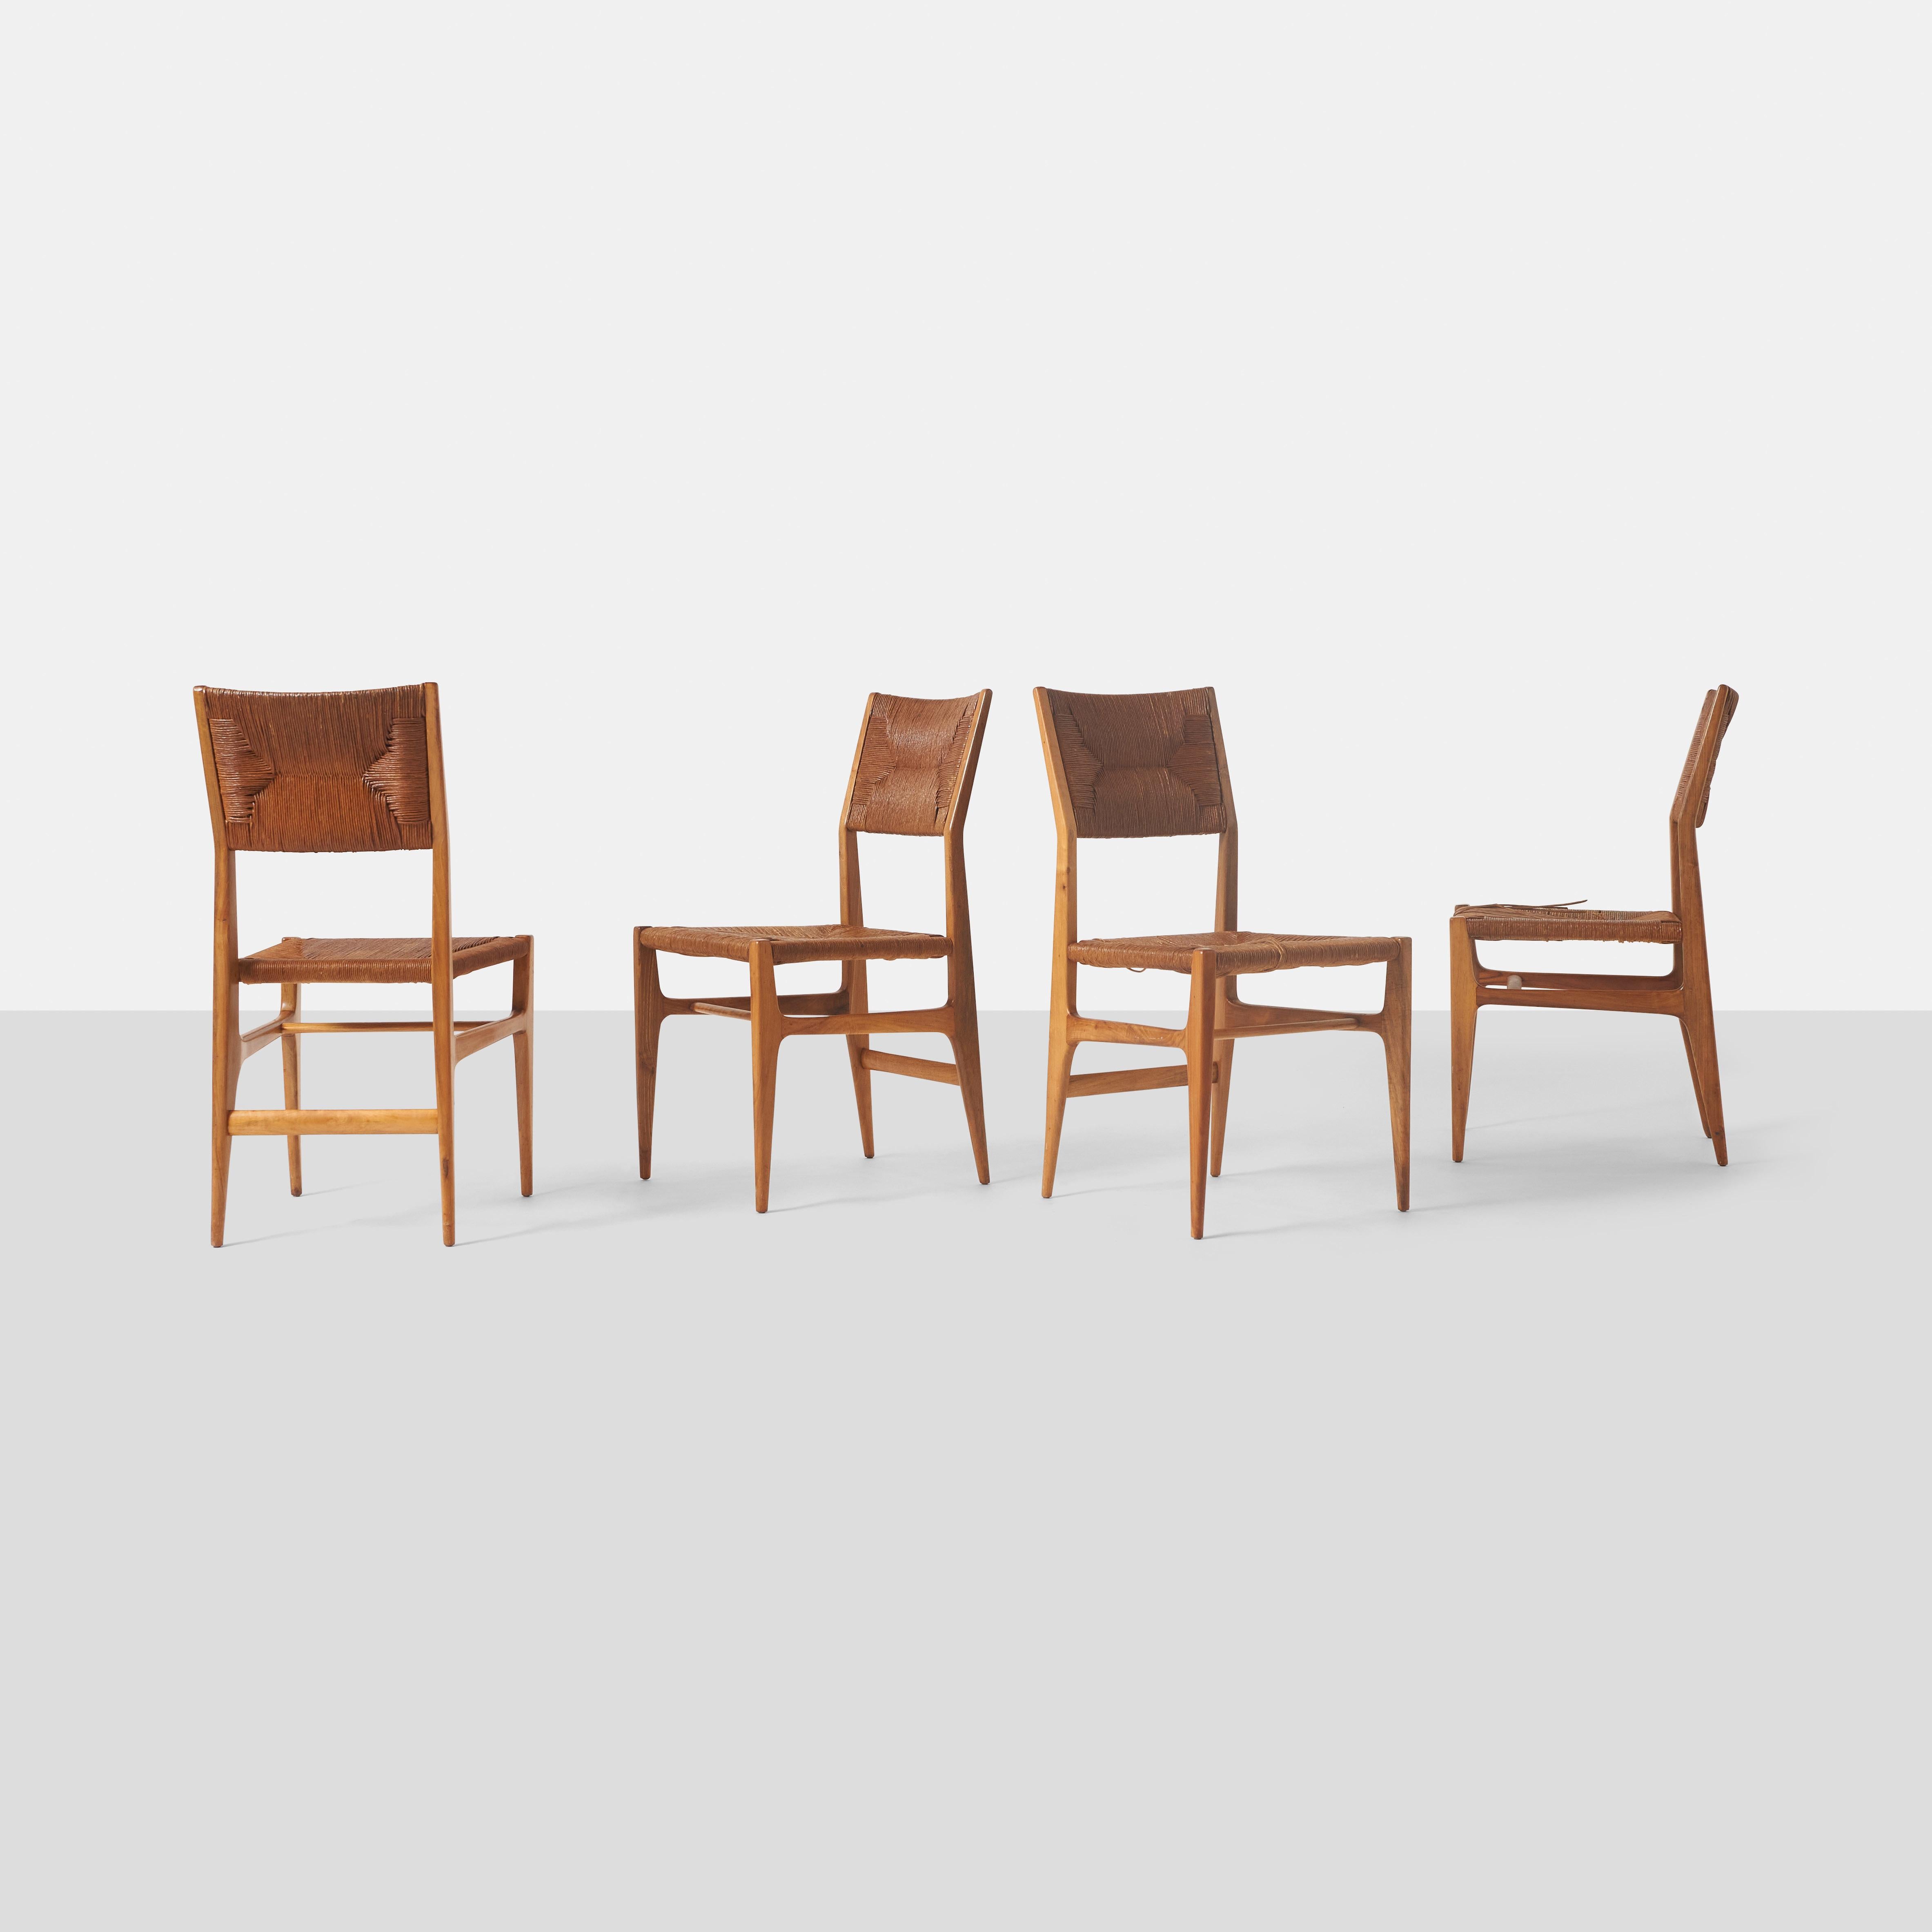 A set of #116 Dining Chairs in walnut, with original rush seats by Gio Ponti for M Singer & Sons of New York.